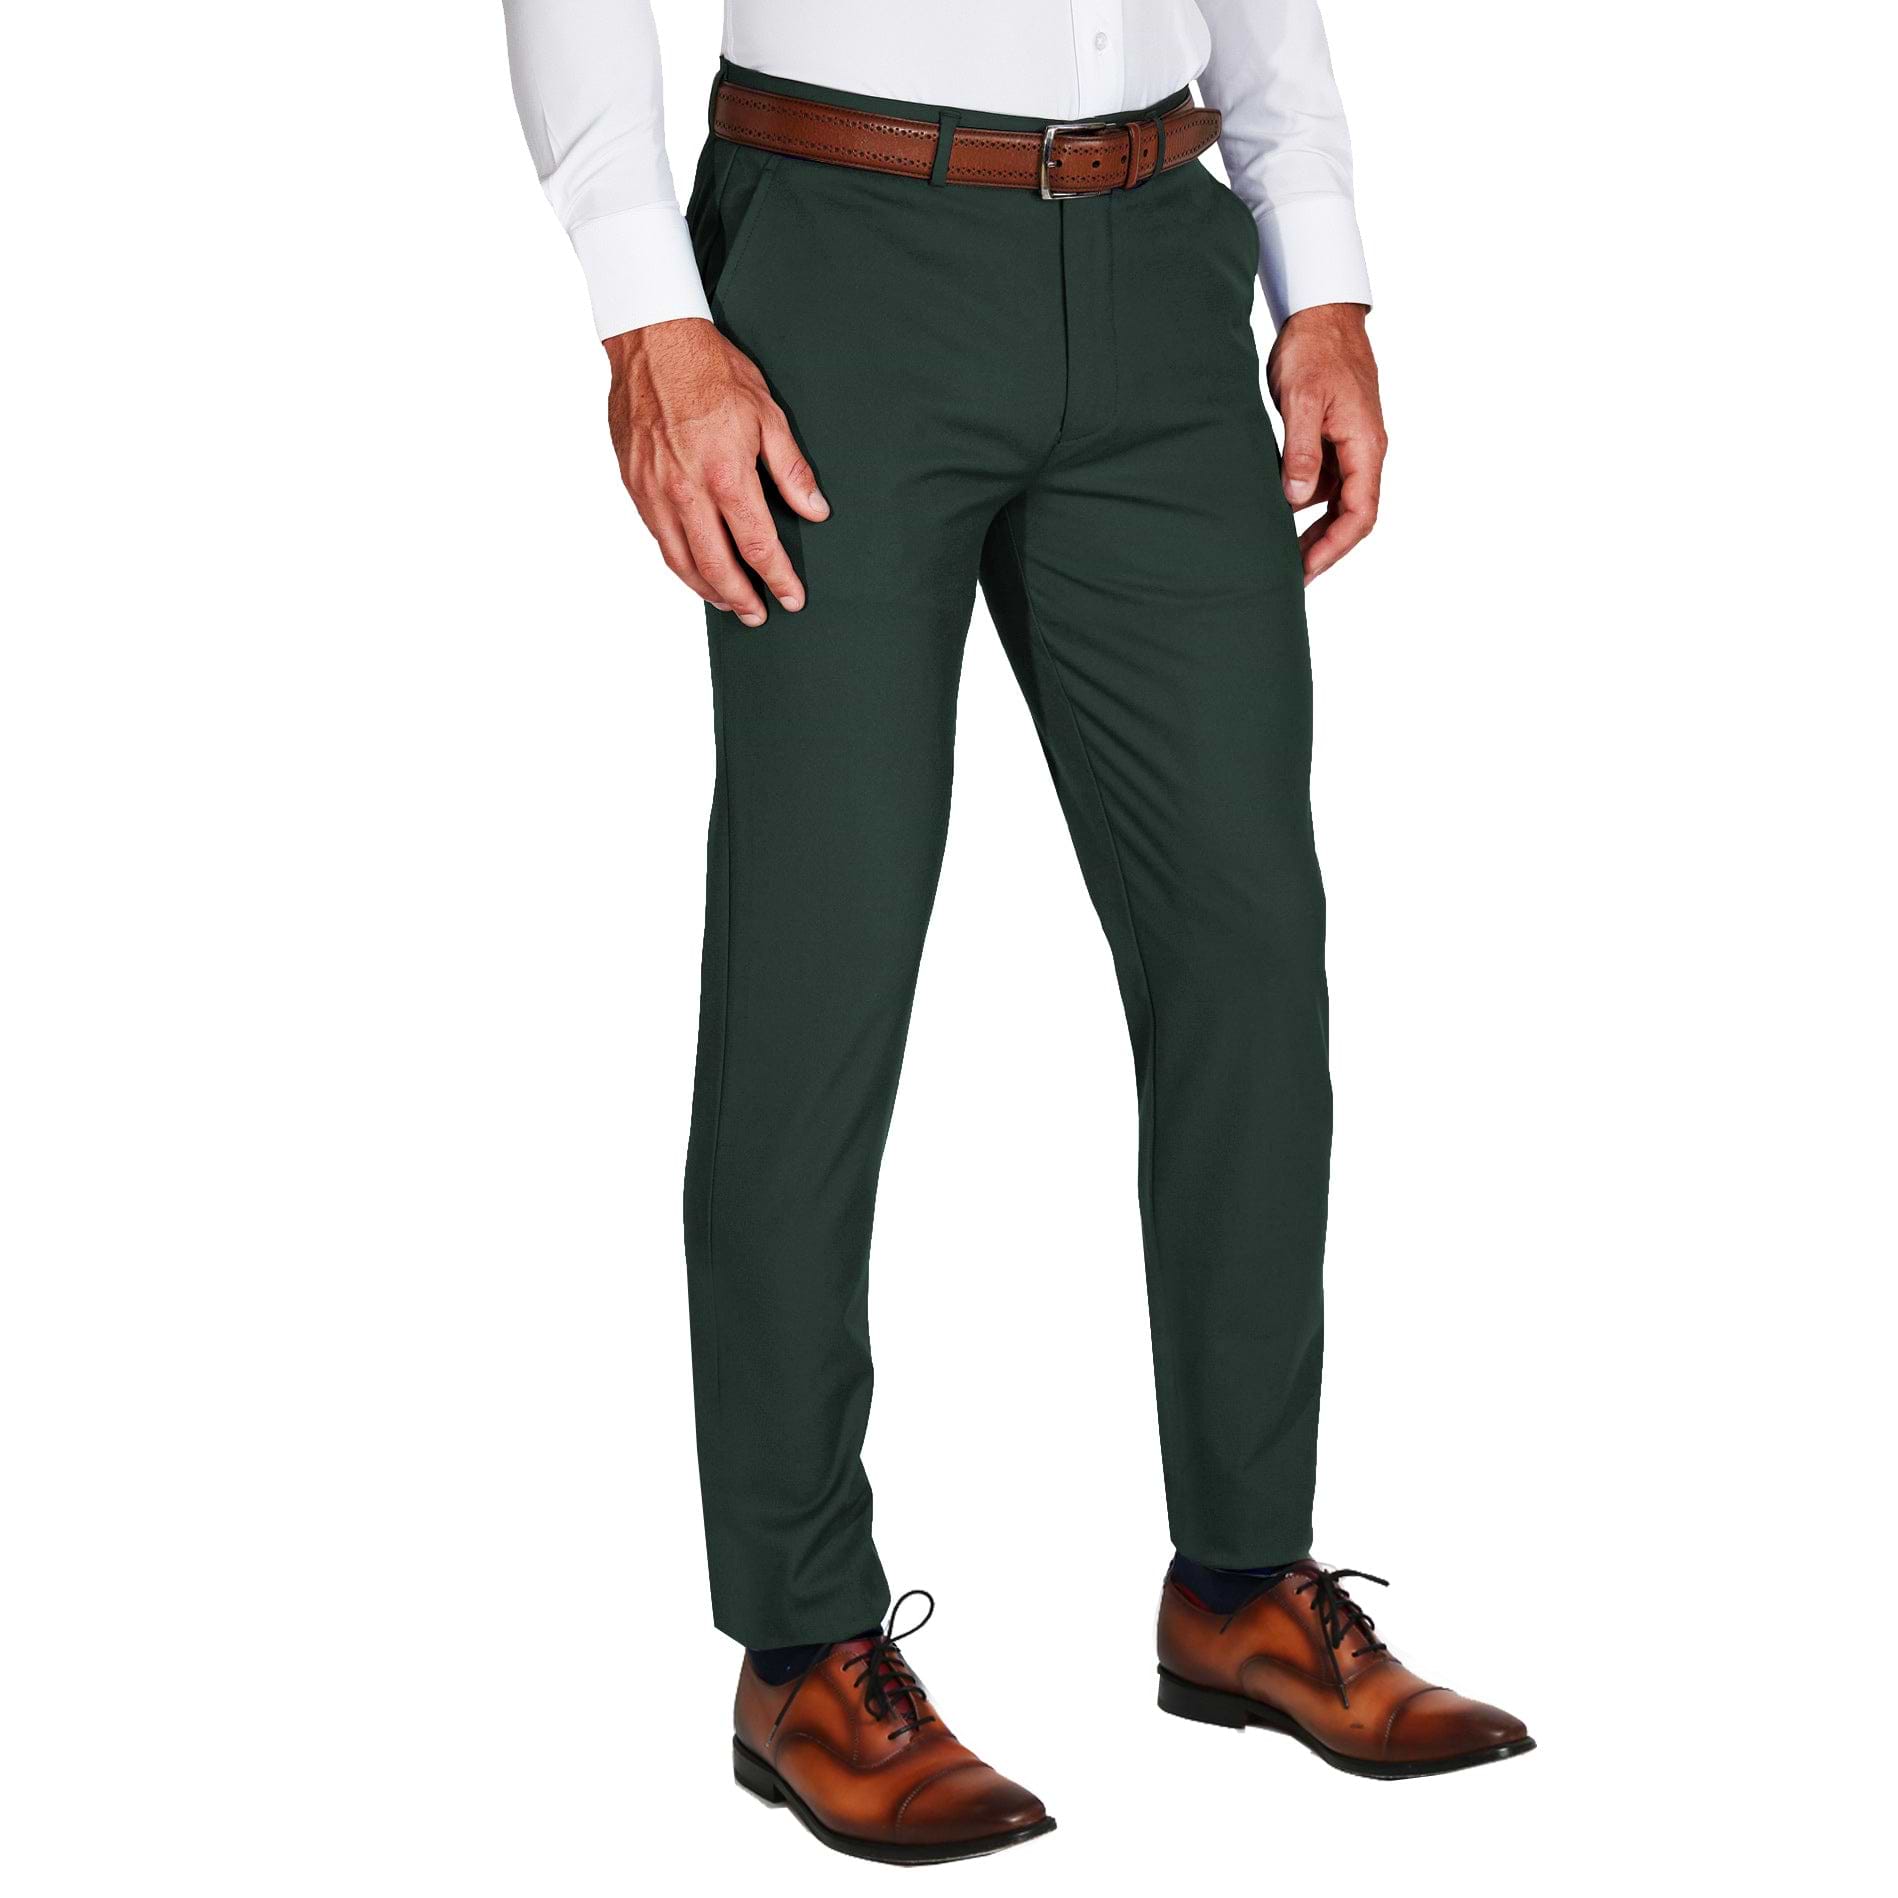 Athletic Fit Stretch Suit - Solid Hunter Green